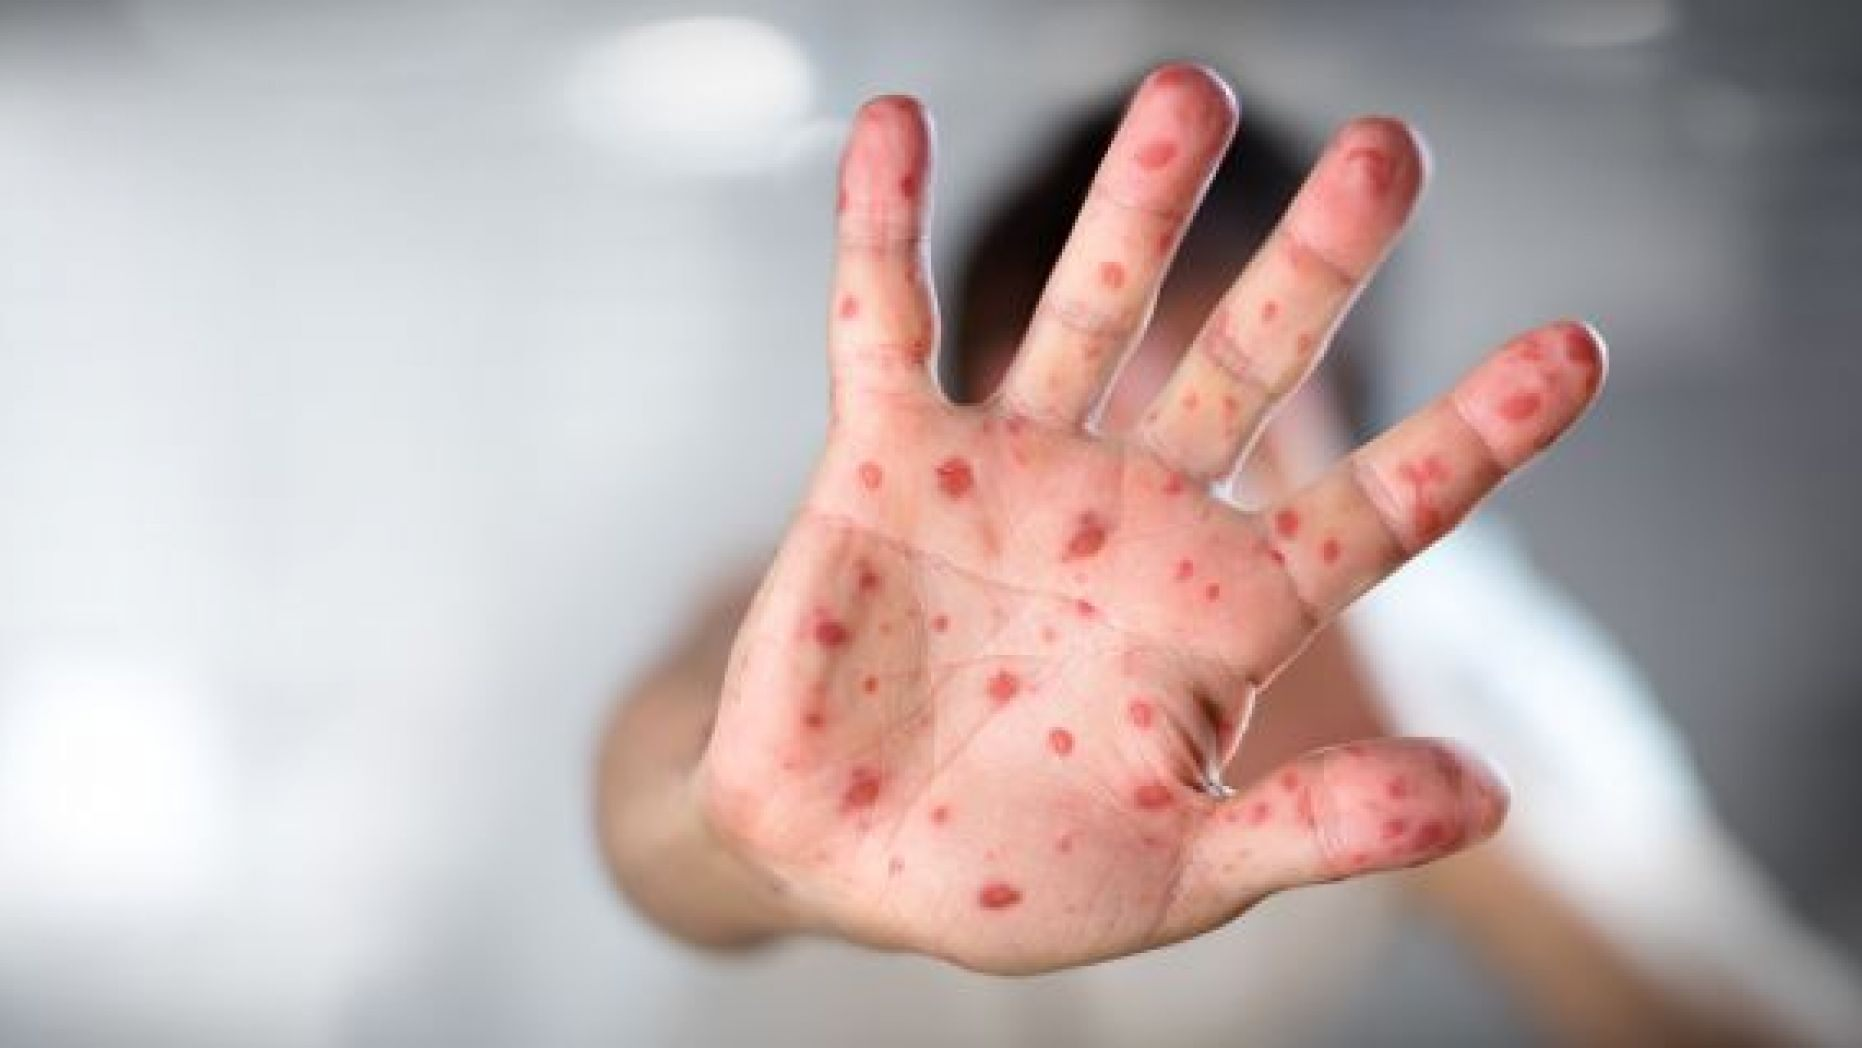 High Quality Child's hand with measles - thank you anti-vaxxers Blank Meme Template